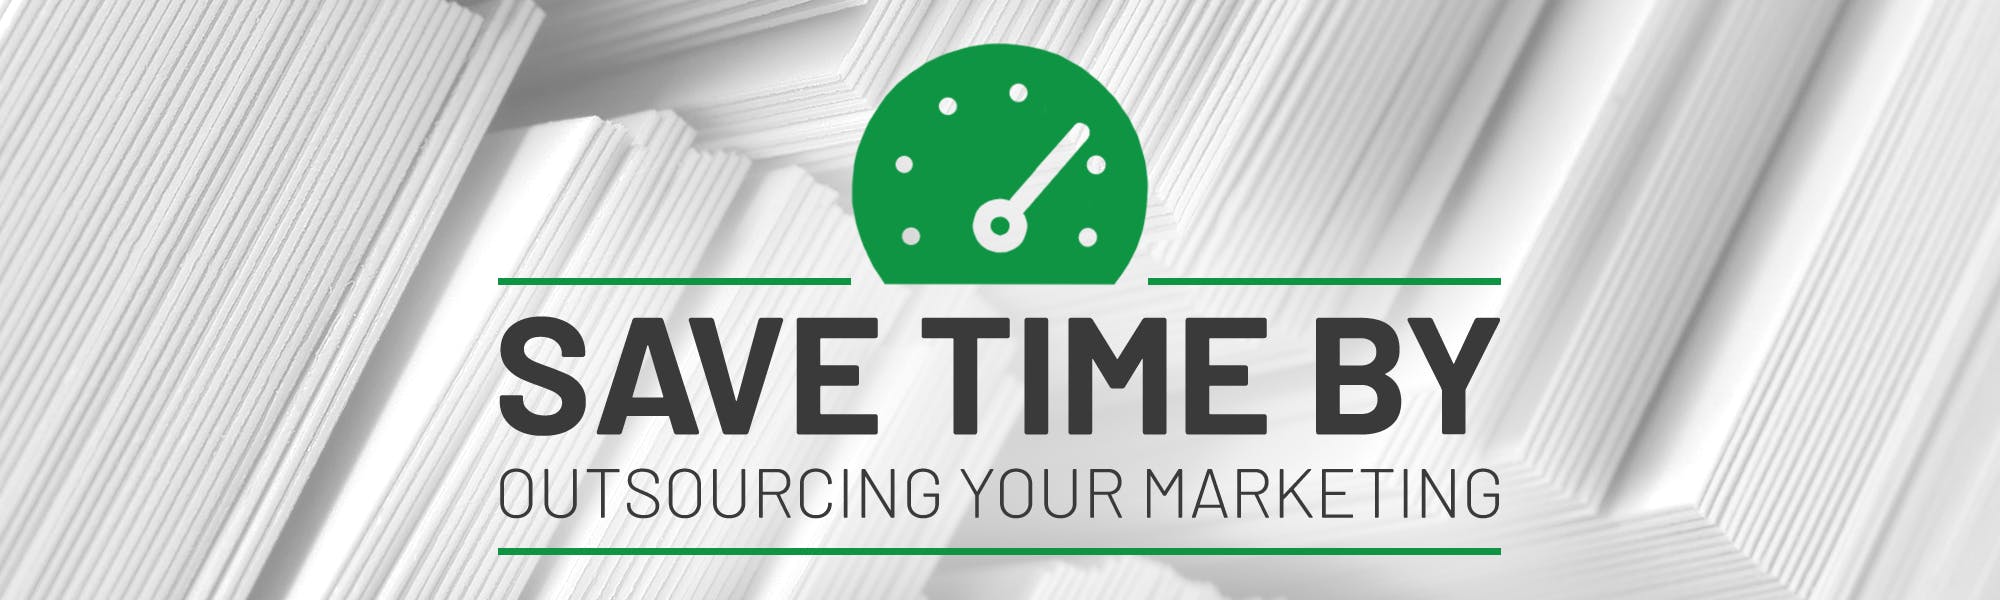 Outsource Your Marketing & Save Time